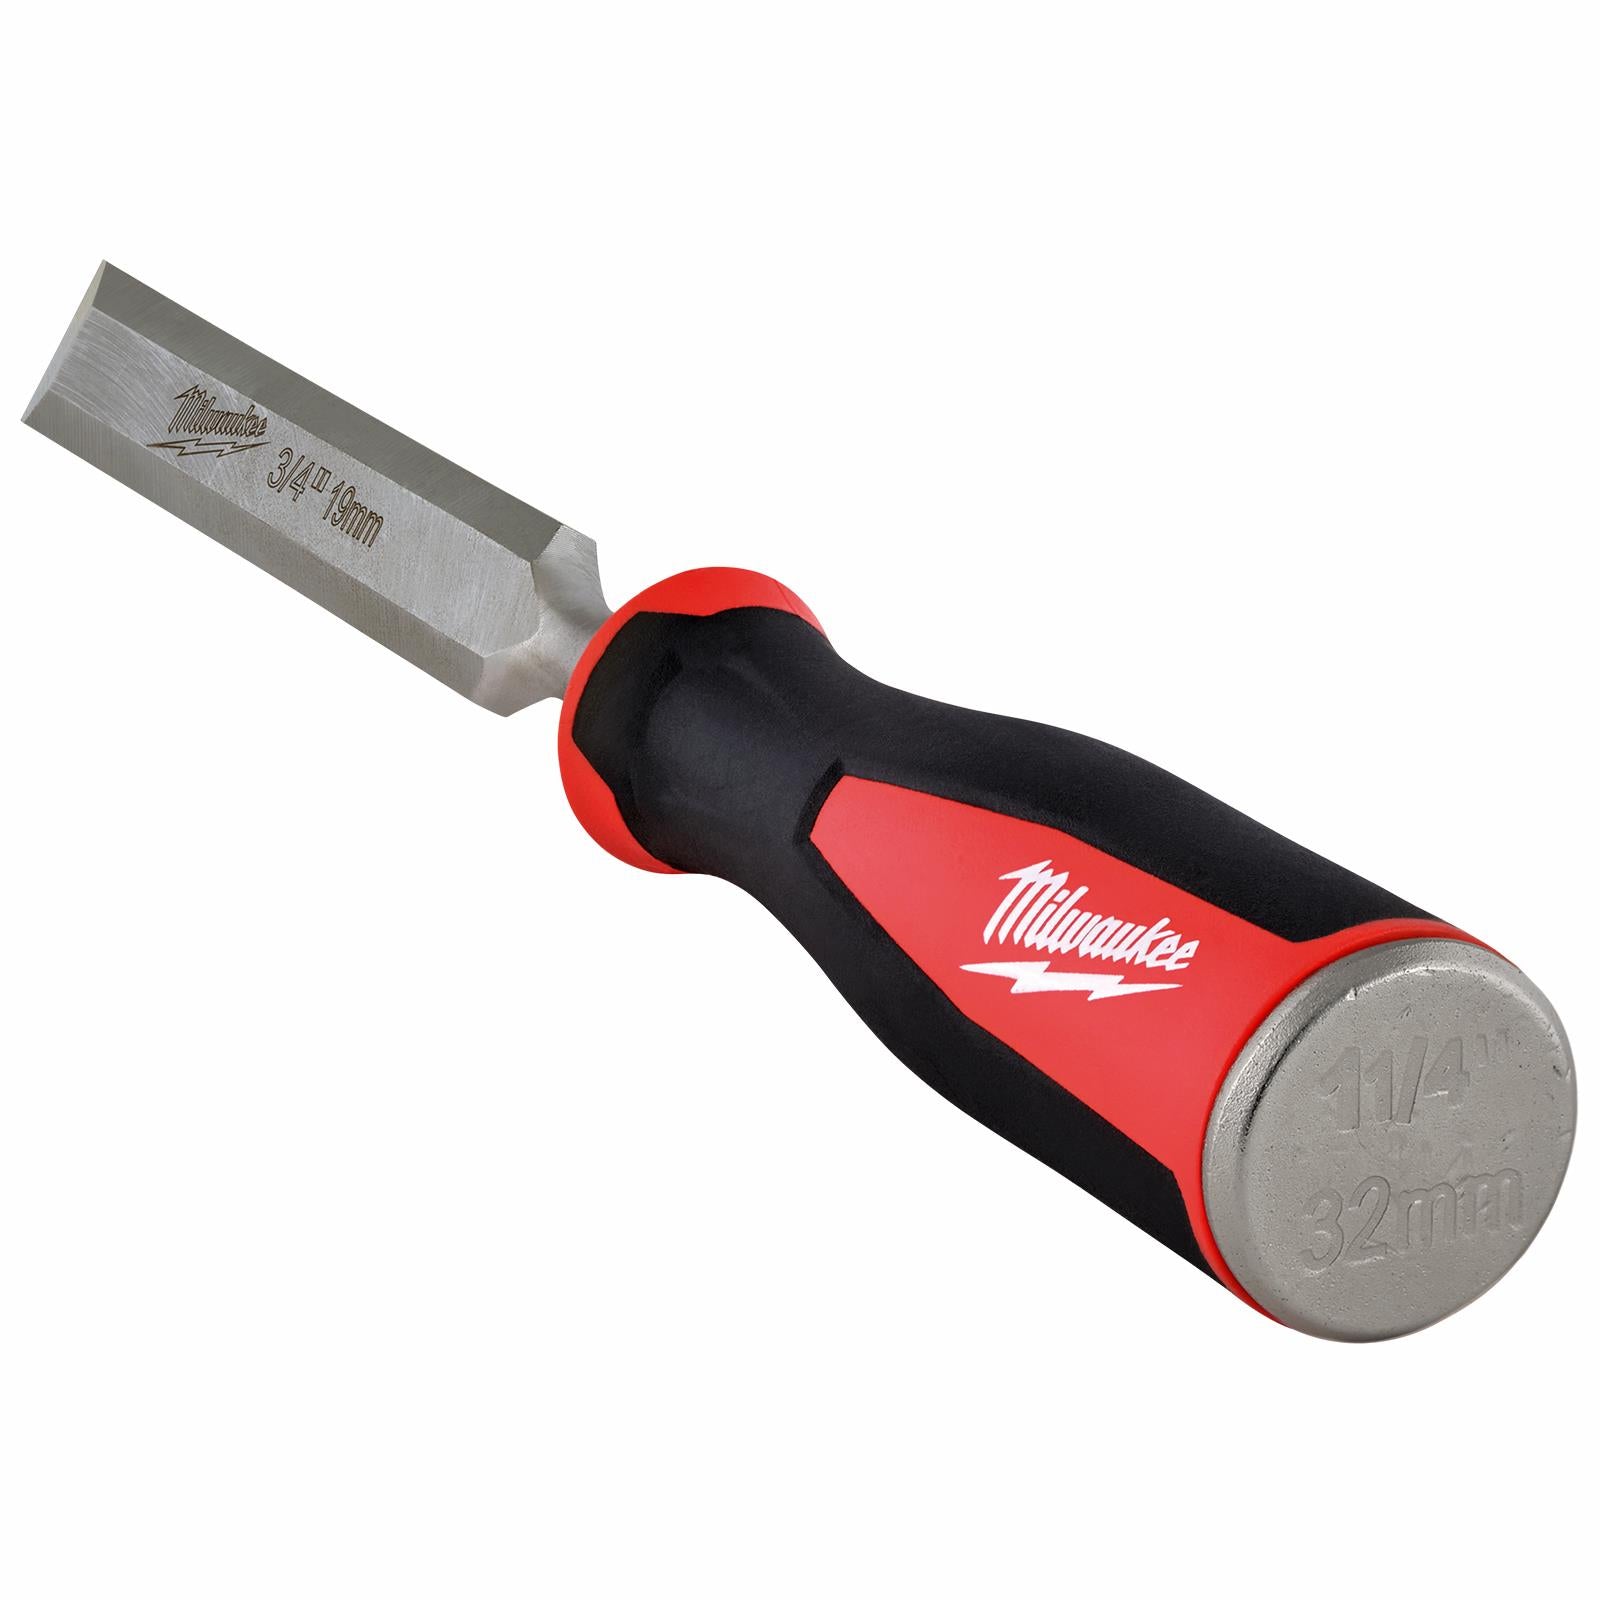 Milwaukee Beveled Edge Wood Chisel 19mm 3/4" All Metal Core with Striking Cap